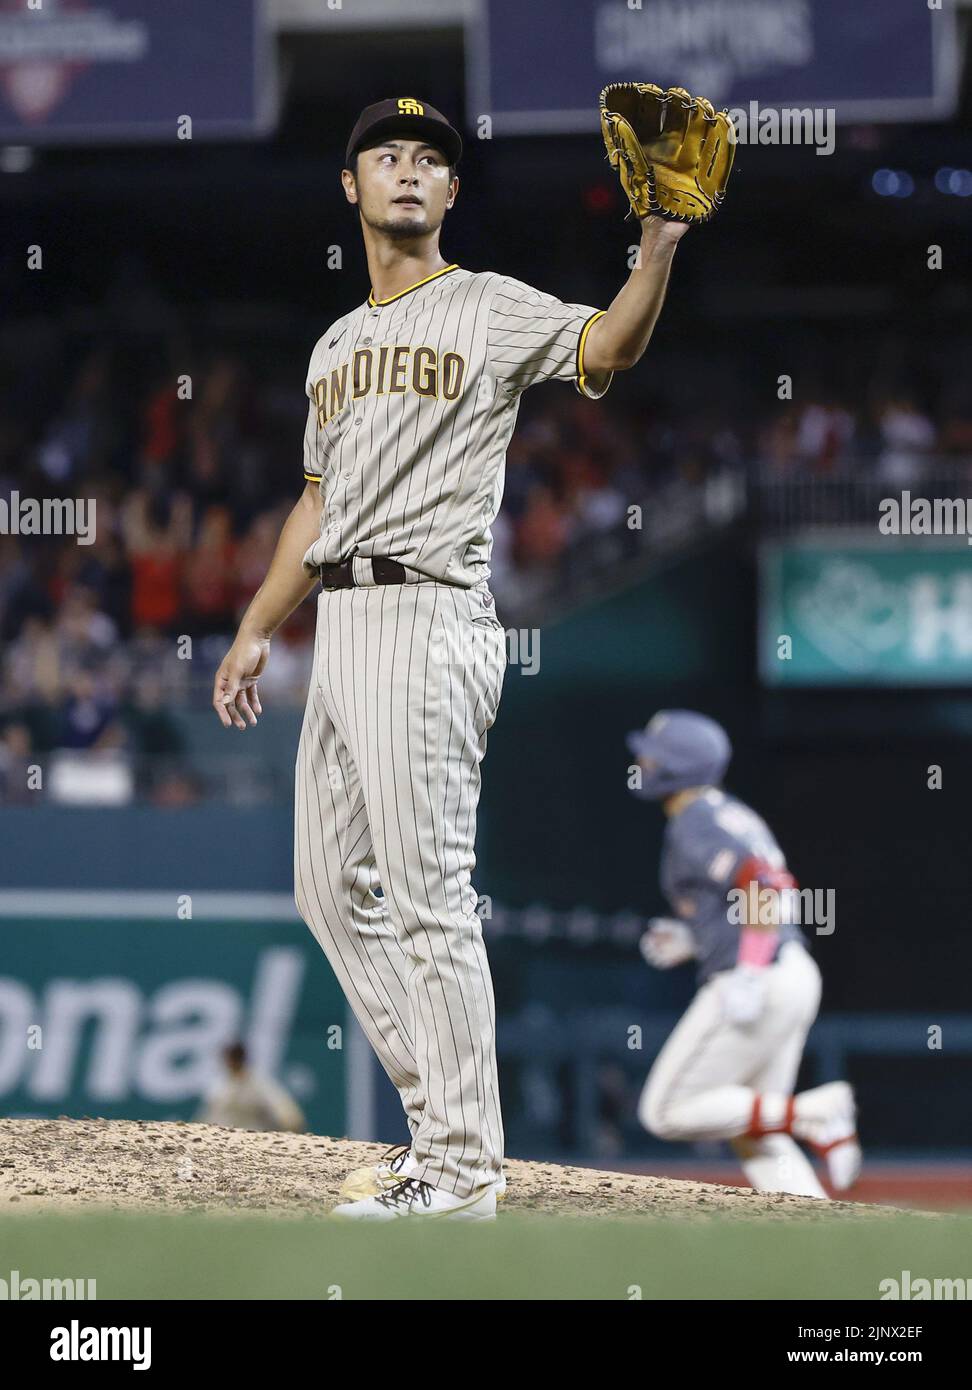 San Diego Padres pitcher Yu Darvish is pictured after allowing a game-tying solo home run to the Washington Nationals' Joey Meneses (bottom R) in the sixth inning at Nationals Park in Washington on Aug. 13, 2022. (Kyodo)==Kyodo  Photo via Newscom Stock Photo